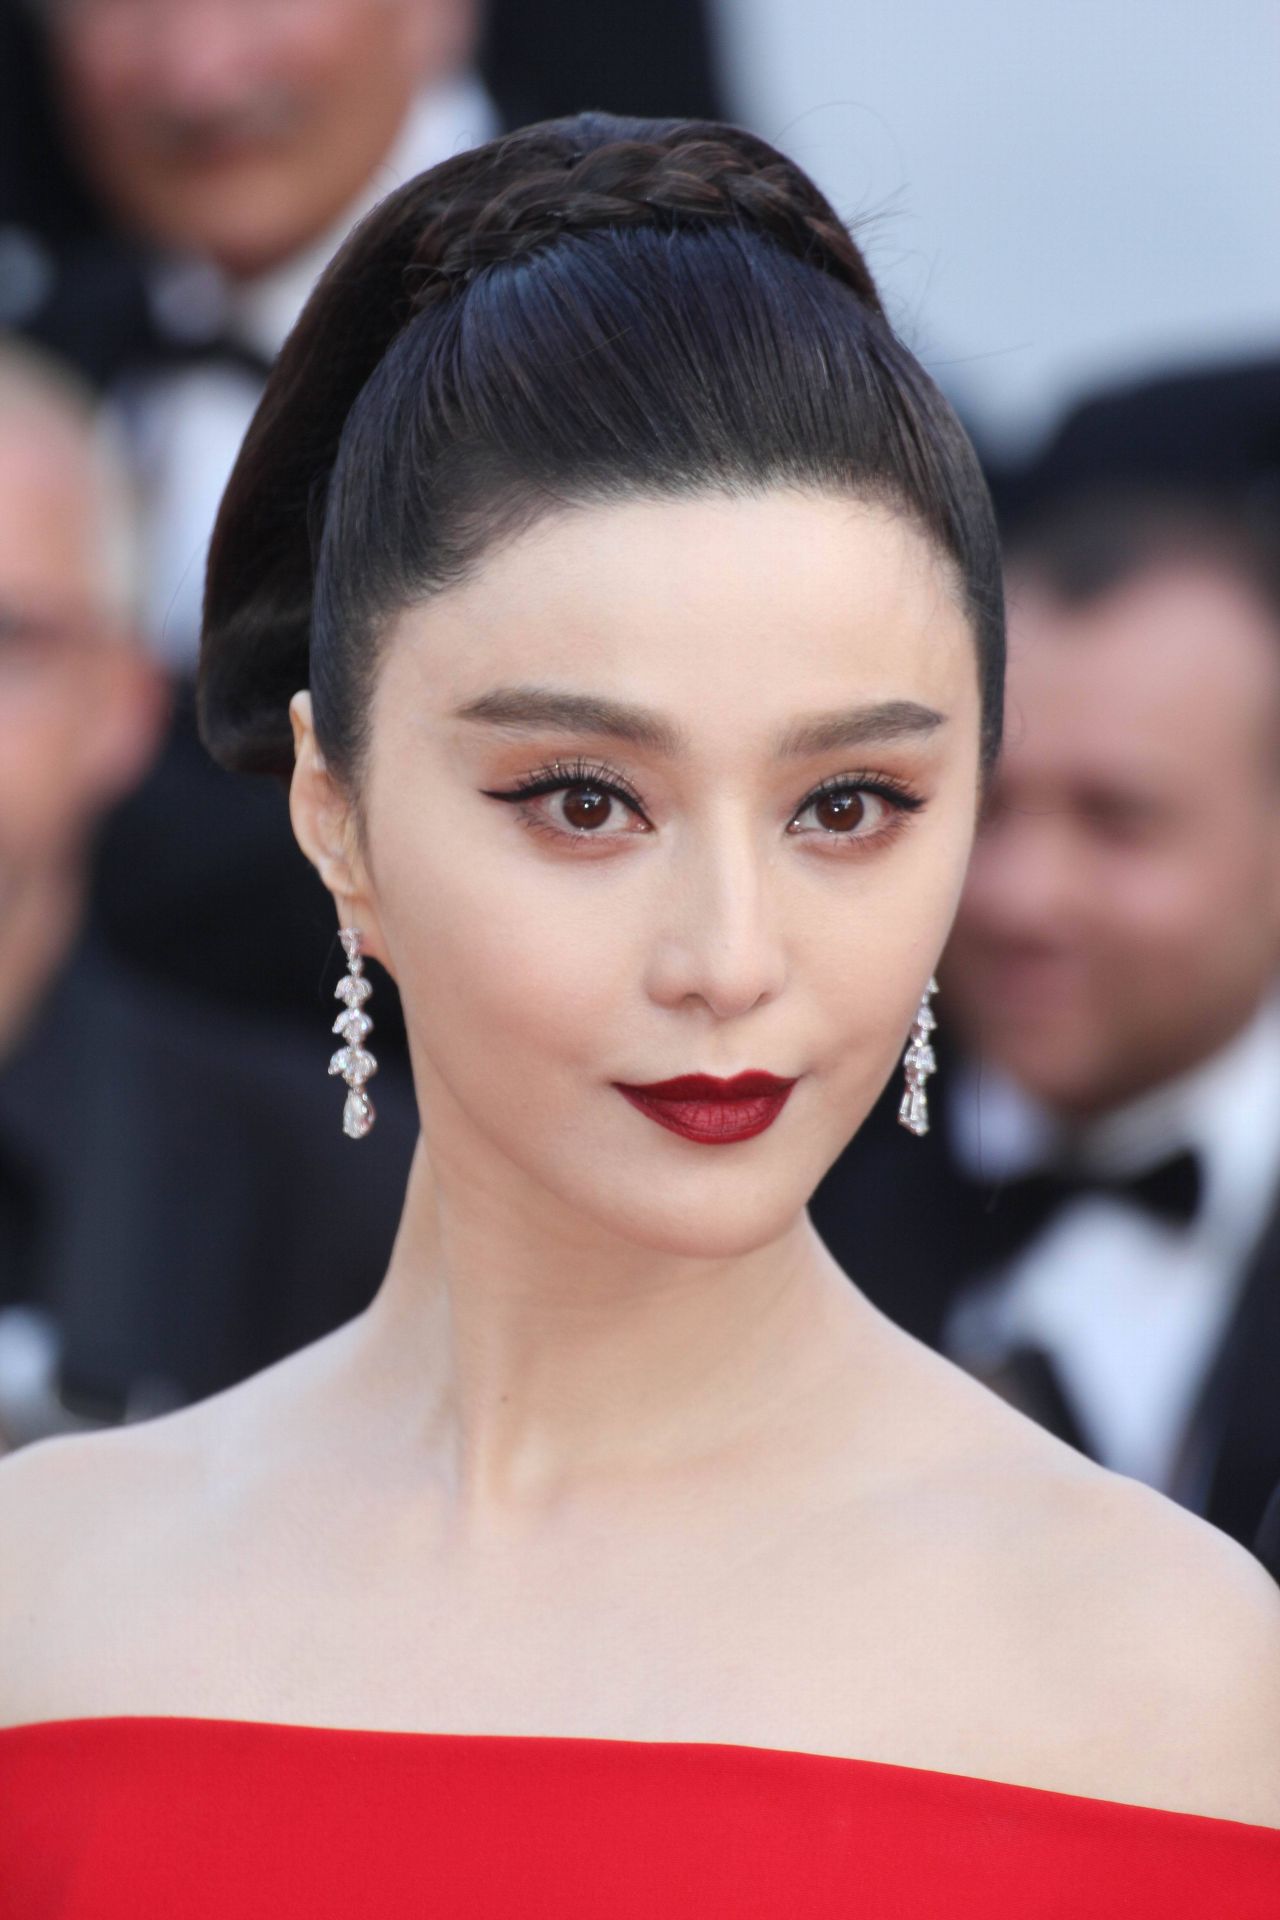 Fan Bingbing Style, Clothes, Outfits and Fashion • CelebMafia